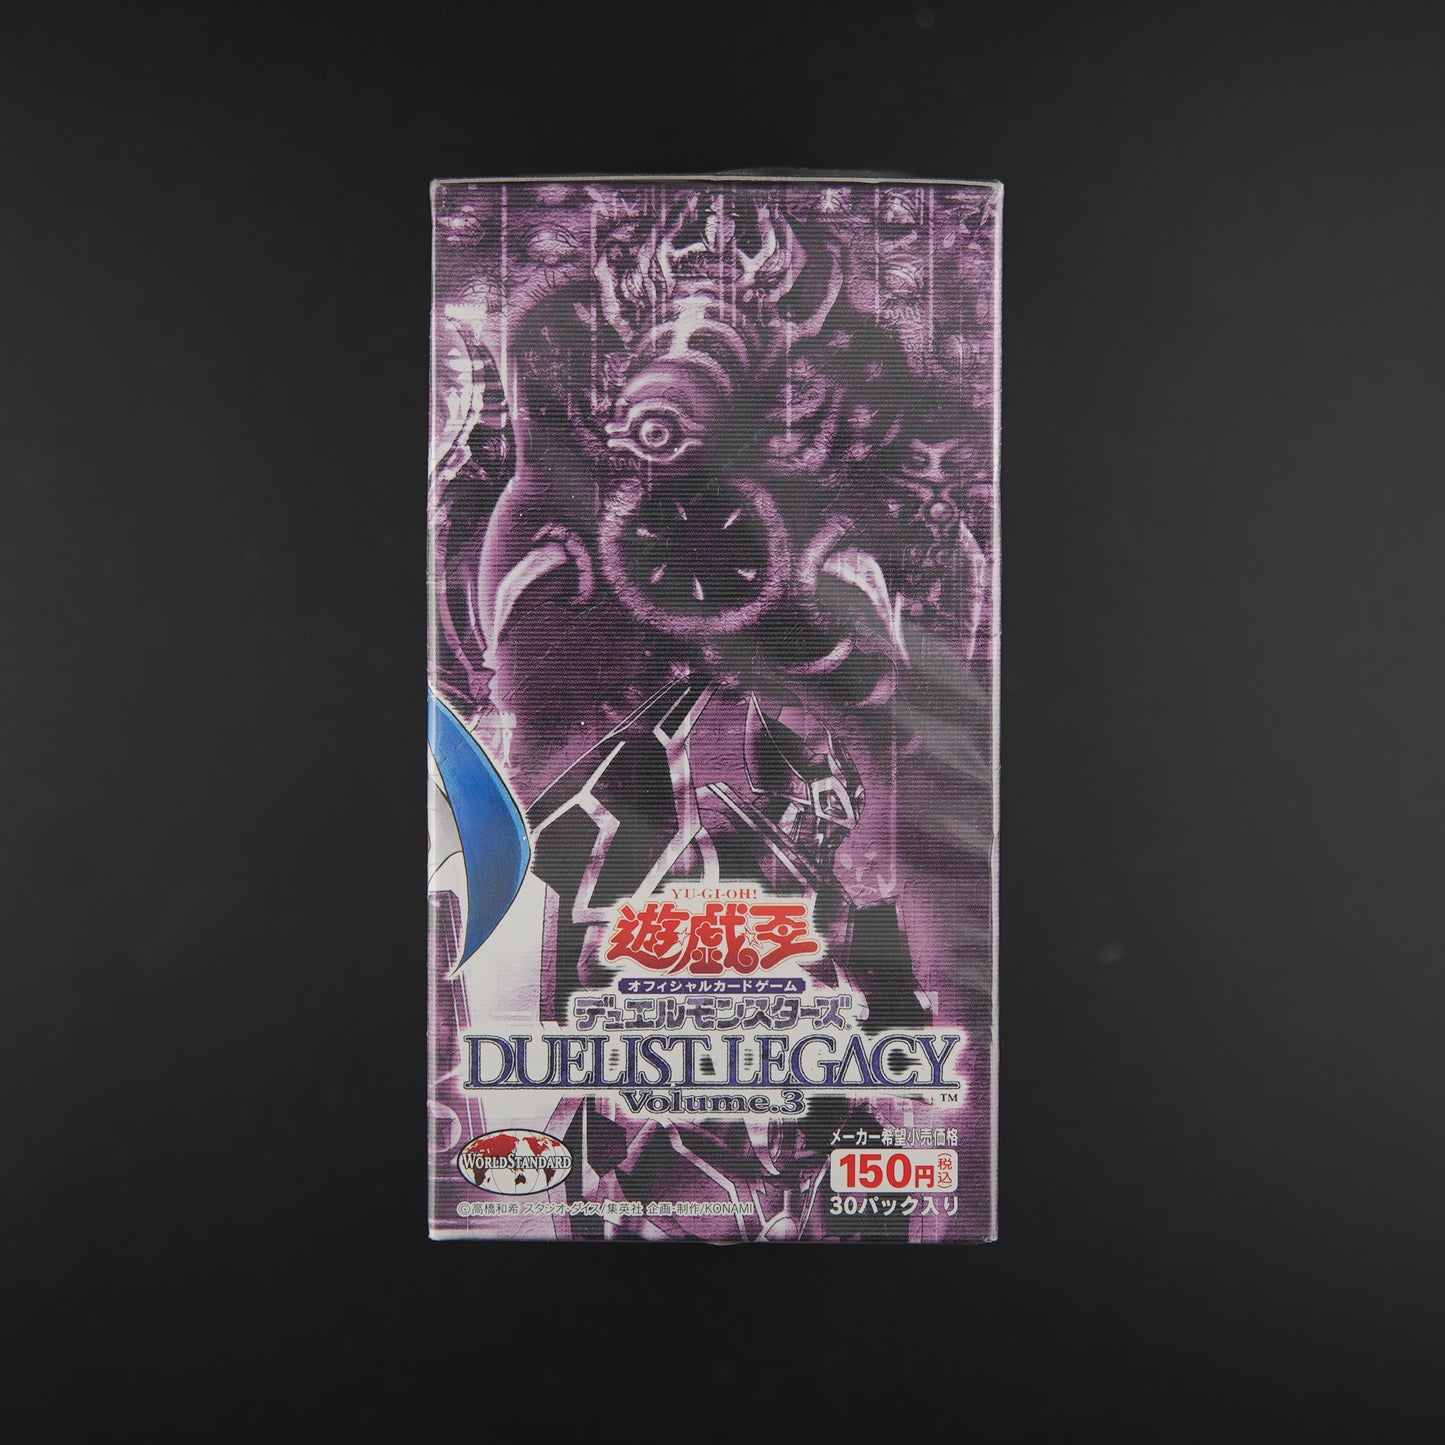 Duelist Legacy Volume 3 Booster Box Japanese